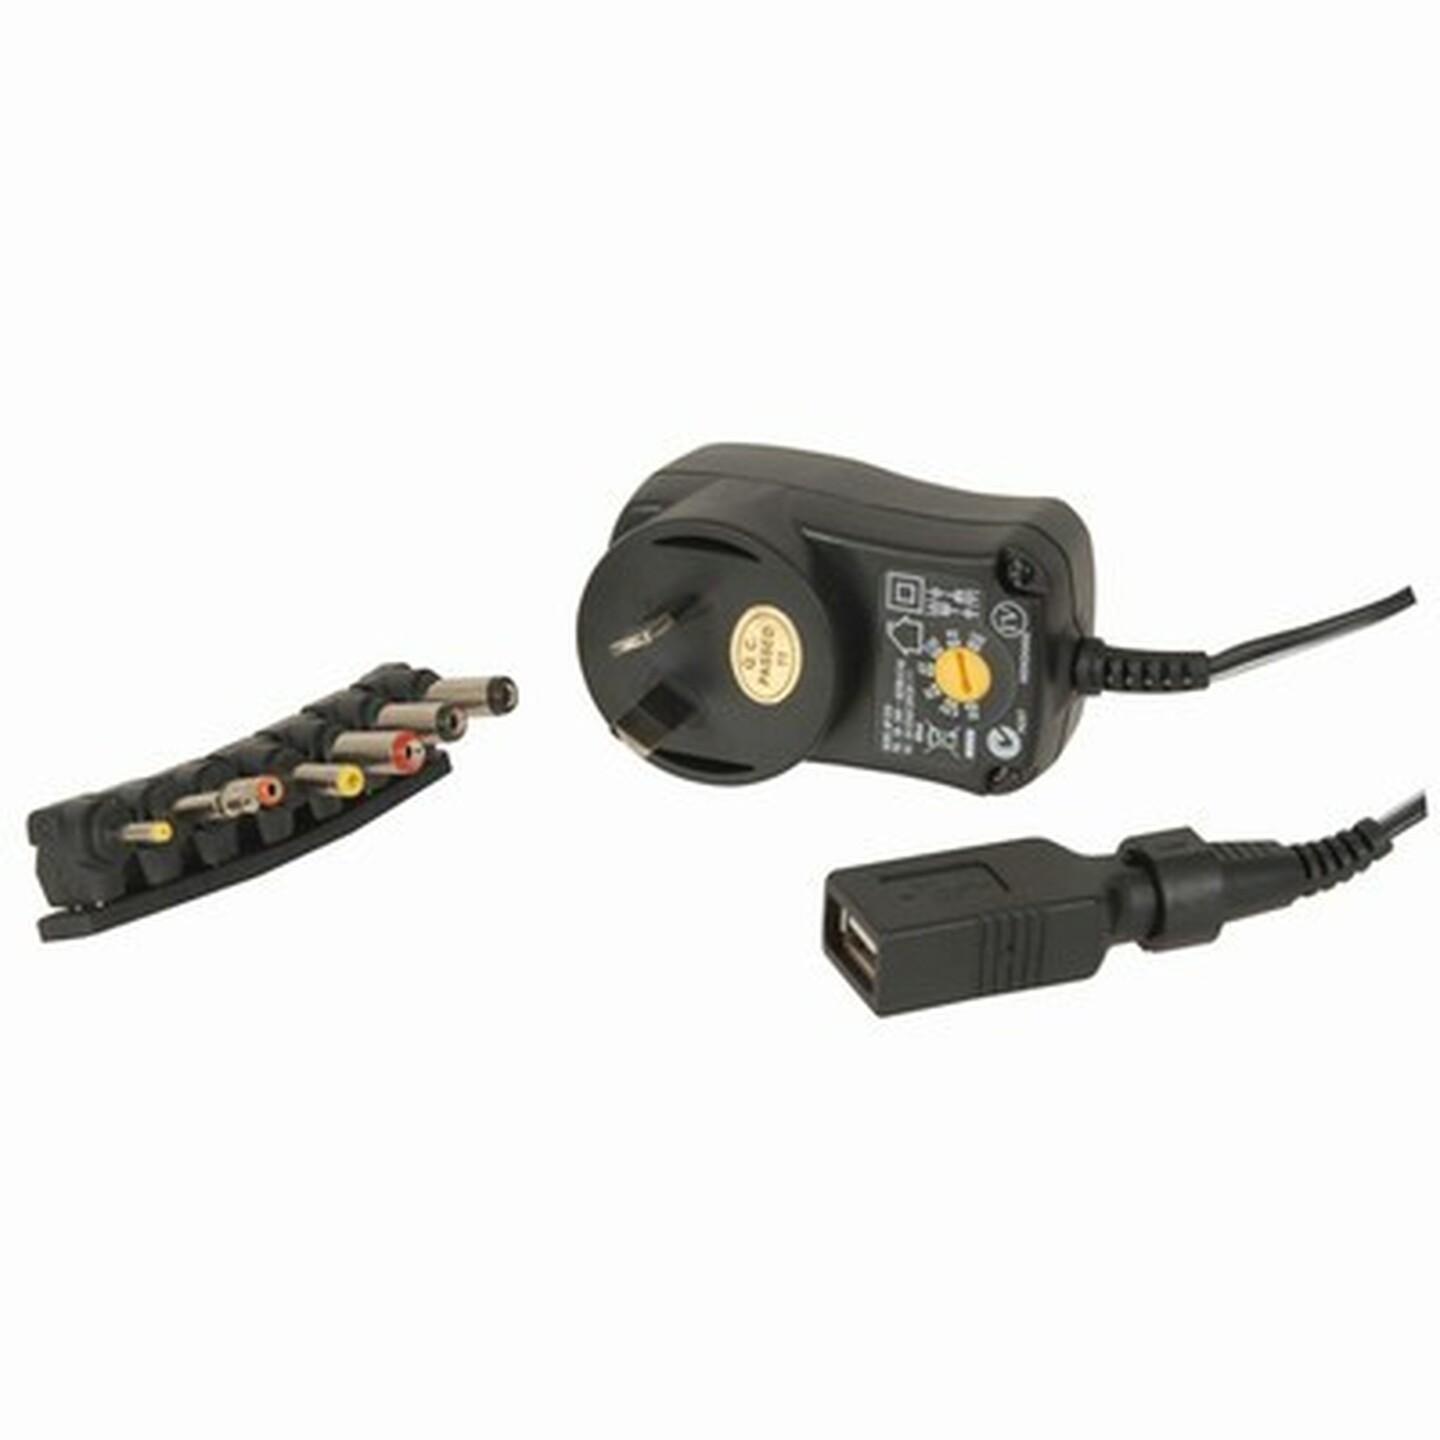 3-12V DC 27W Power Supply 7DC Plugs and USB Outlet